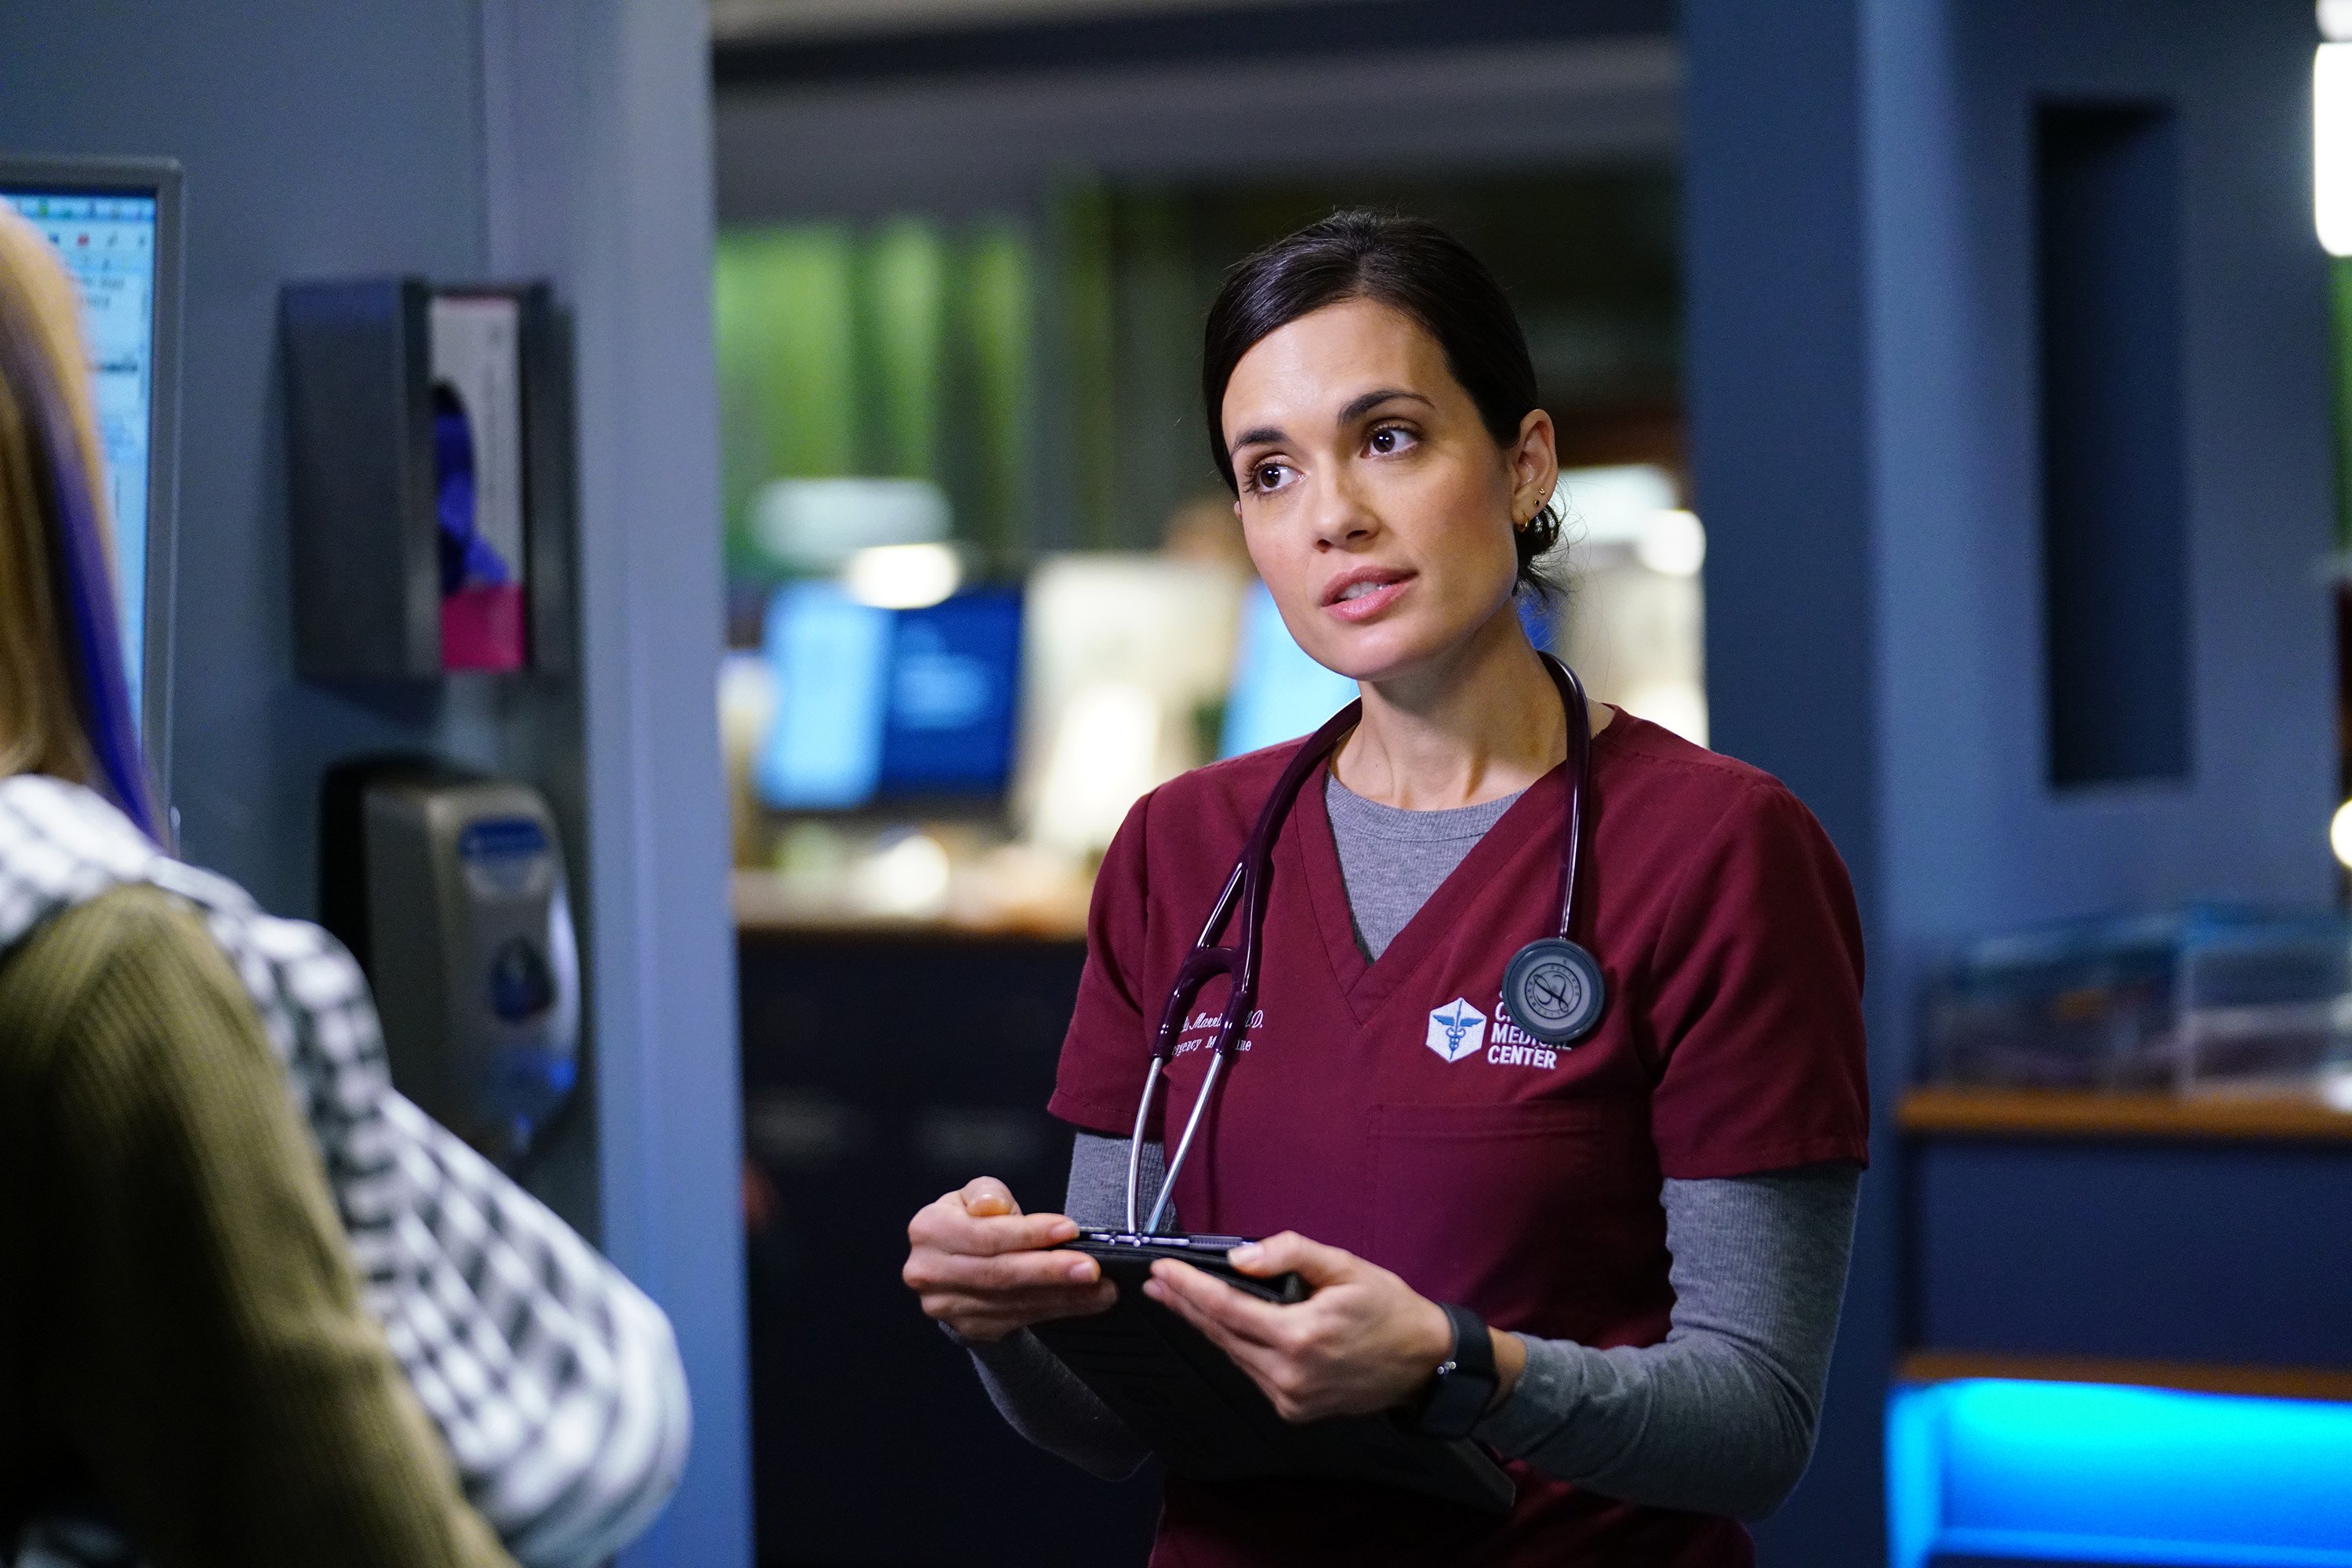 Torrey DeVitto as Dr. Natalie Manning on the medical drama series "Chicago Med" during Season 5 | Photo: Getty Images